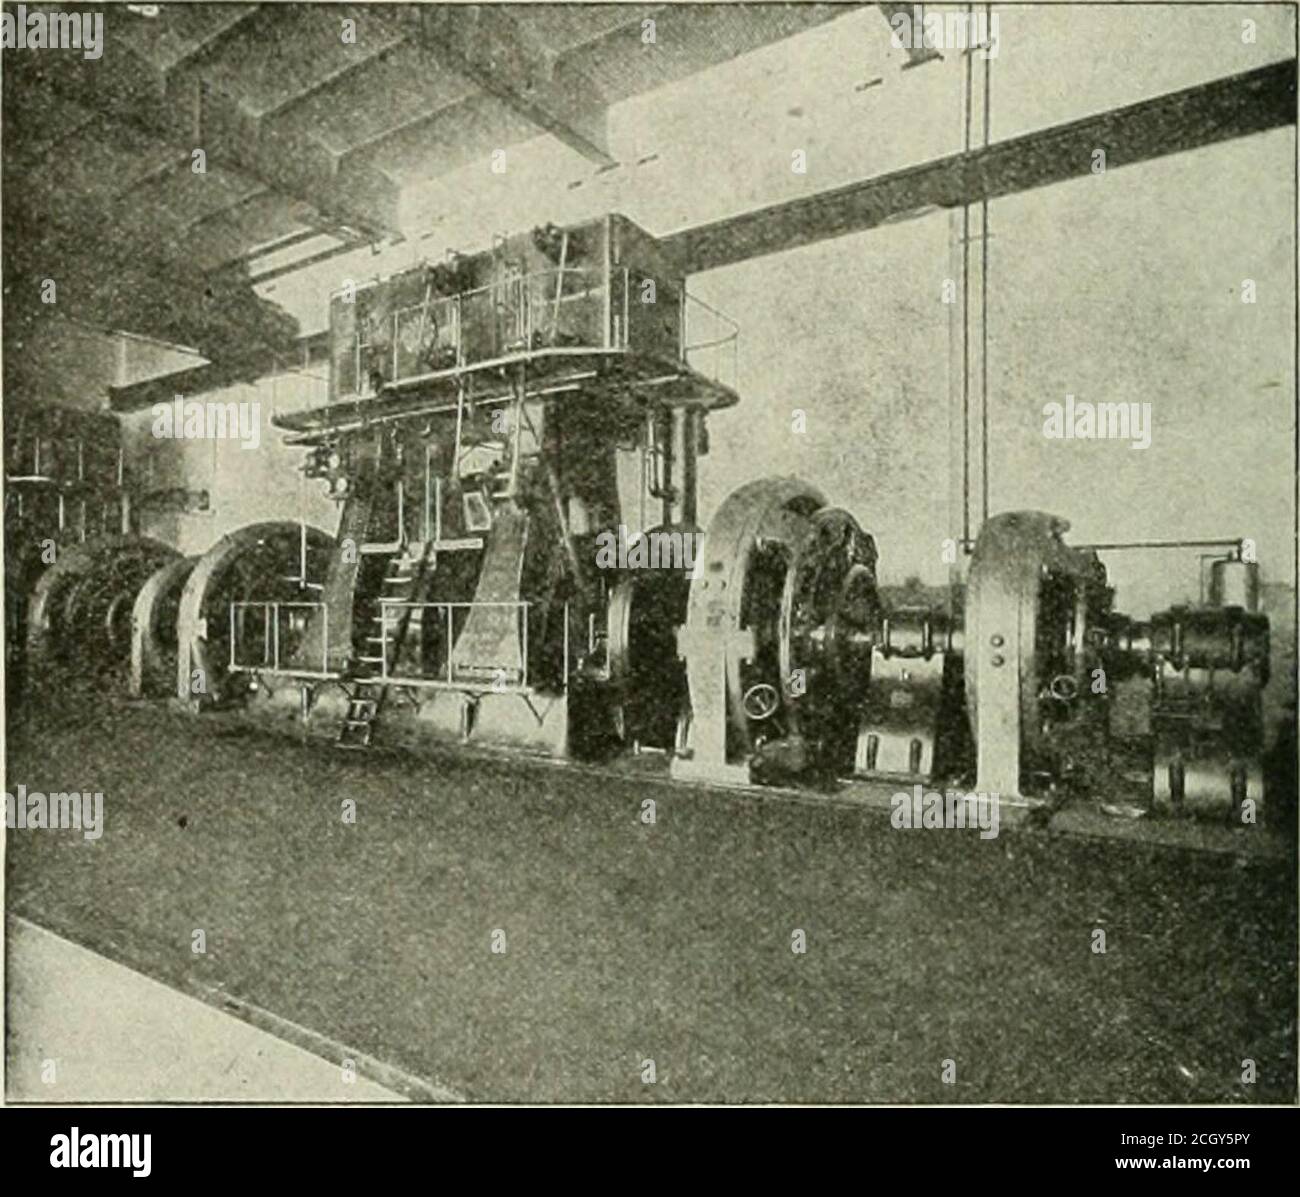 . The street railway review . Fir,. 1—100-IX. MAGNETIC CLI:TCH. 3,000 h. p. at 150 r. p. m. This is one of three clutches now inuse connecting the engines and generators in the central stationof the Imperial Electric Light, Heat & Power Co., at St. Louis, aview of the equipment of which is shown in Fig. 2. The experiencewith this plant demonstrates that this form of clutch is applicableto the large size units now being installed for power station pur-poses, whereas the ordinary friction clutch becomes unwieldy andunsightly after passing the 500-h. p. size.. IK;. 2-PL.NT of IMlERIAI^ EI,ECTRIC Stock Photo